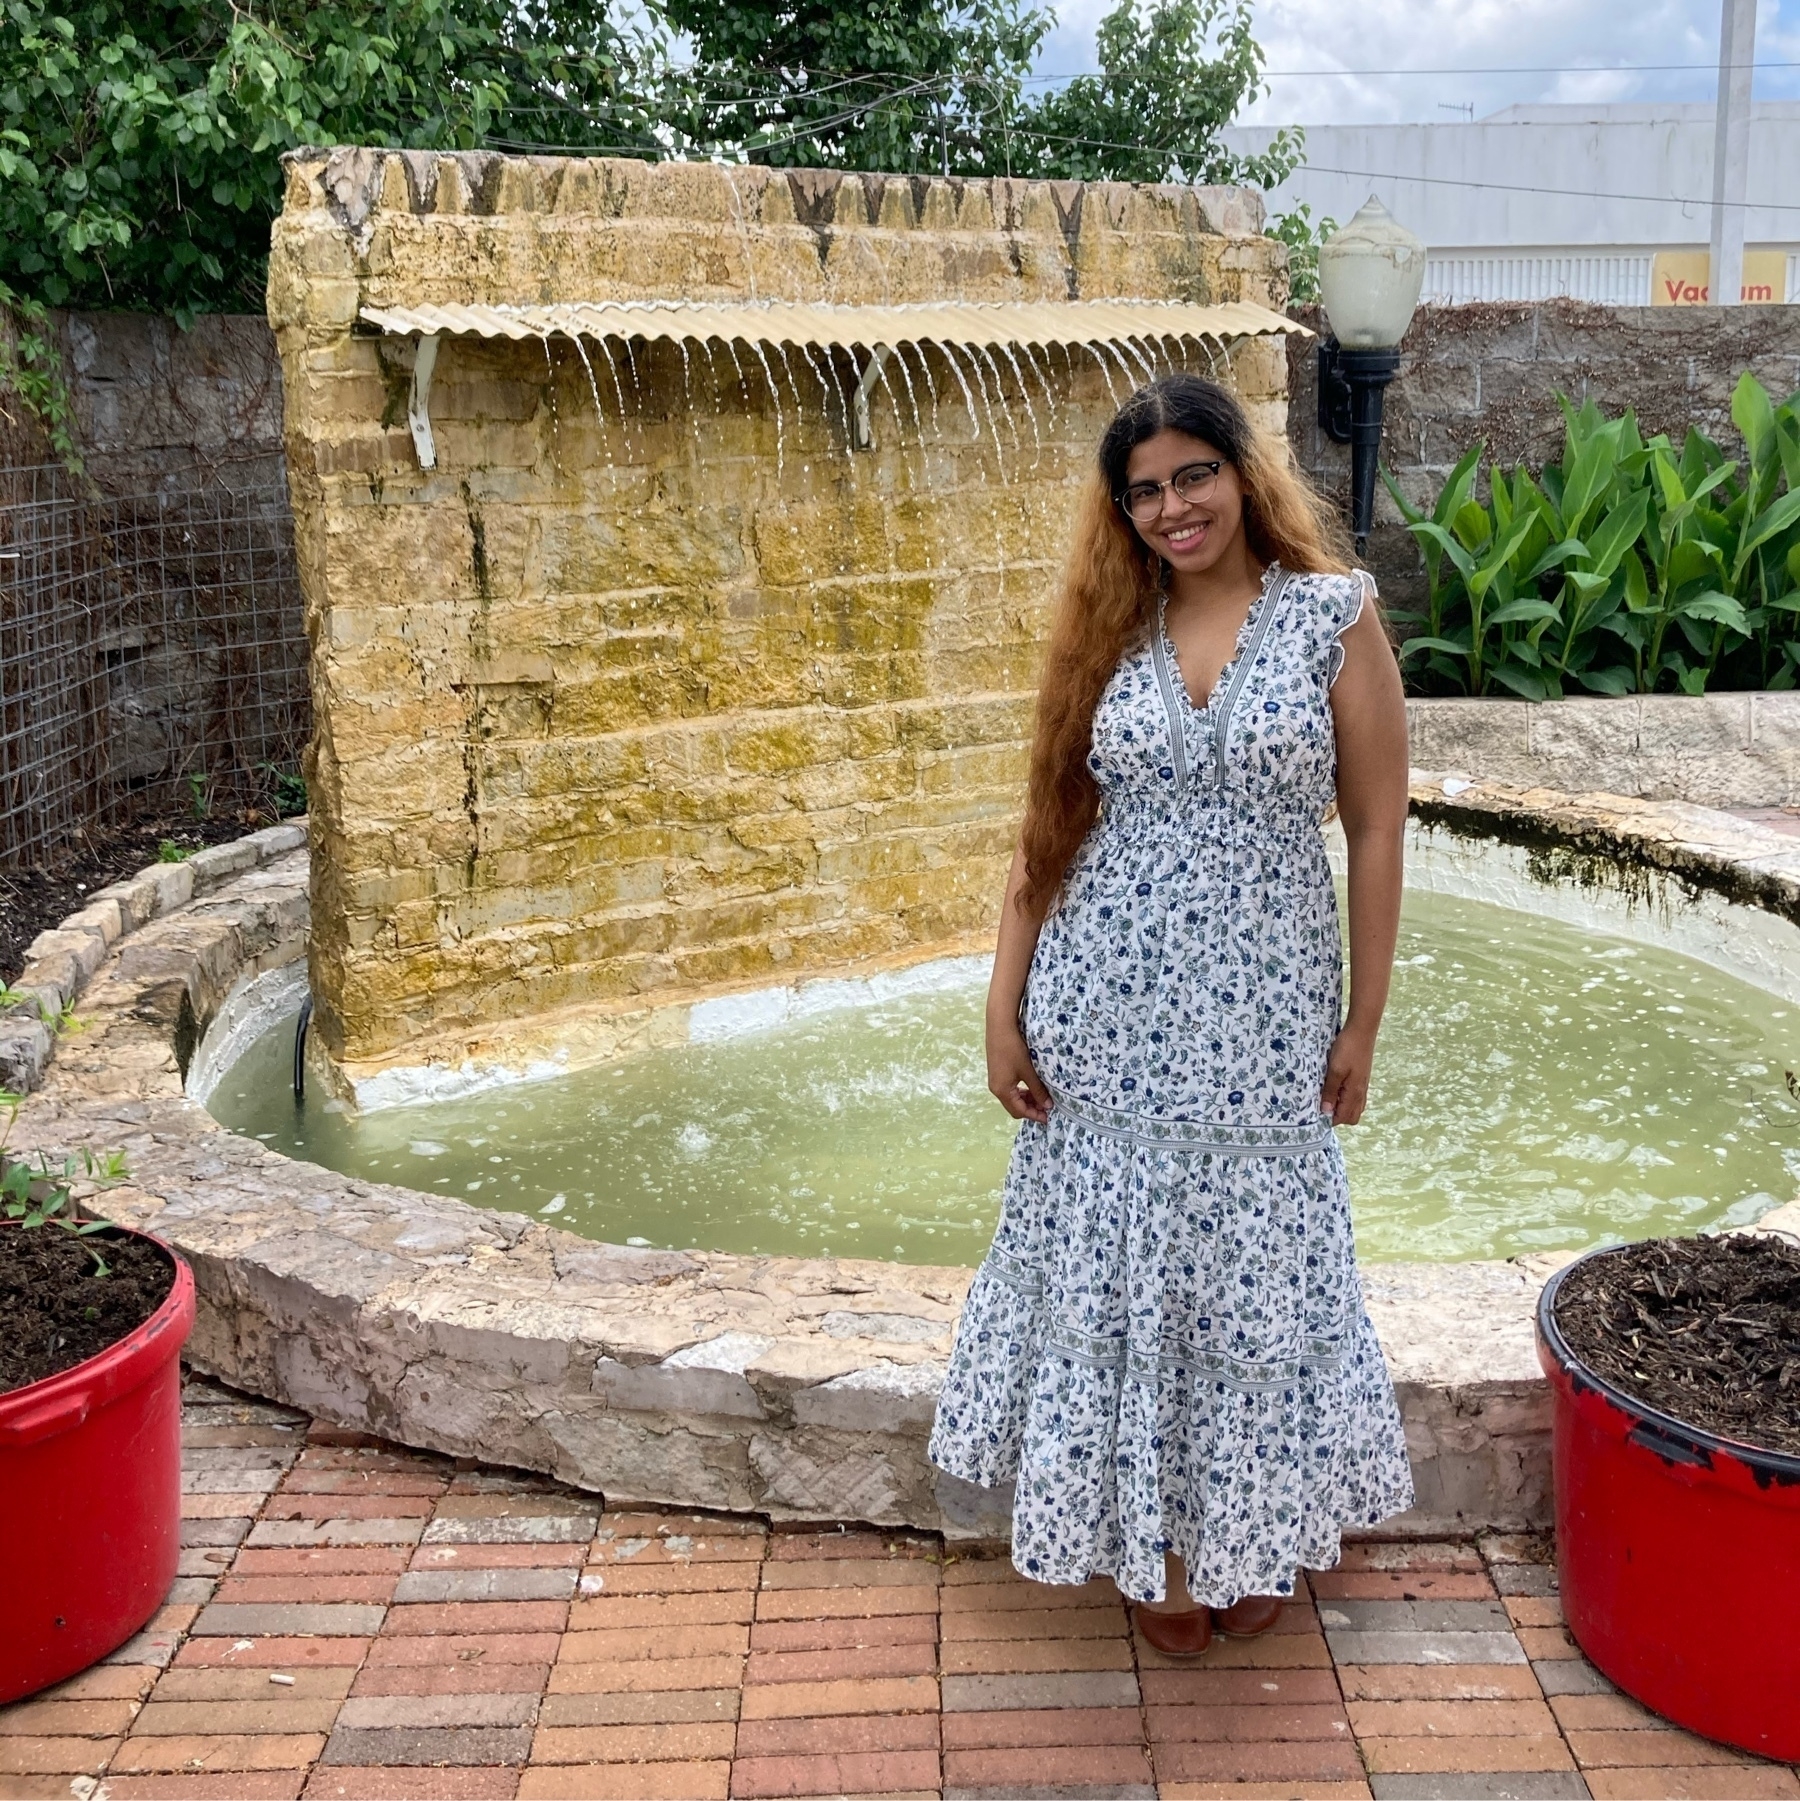 Me in a dress standing in front of a waterfall